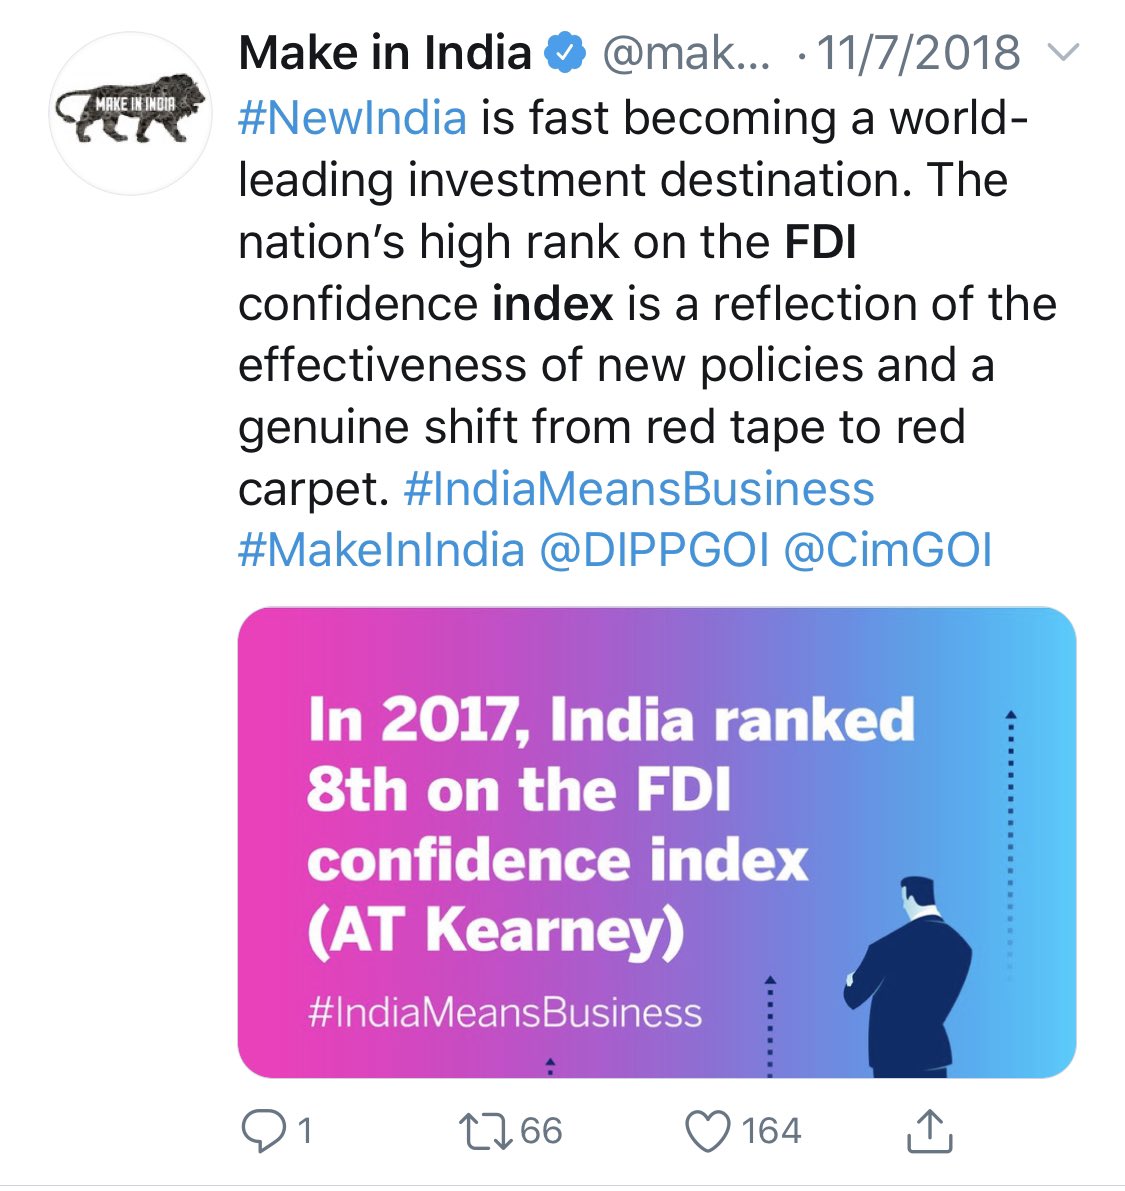 In 2017, amid great fanfare PM Modi had announced that India has ‘jumped’ to 8th place in the 2017 Global FDI Confidence Index. It was touted as a ‘Make in India’ milestone that India was in the ‘Top 10’. 2/n